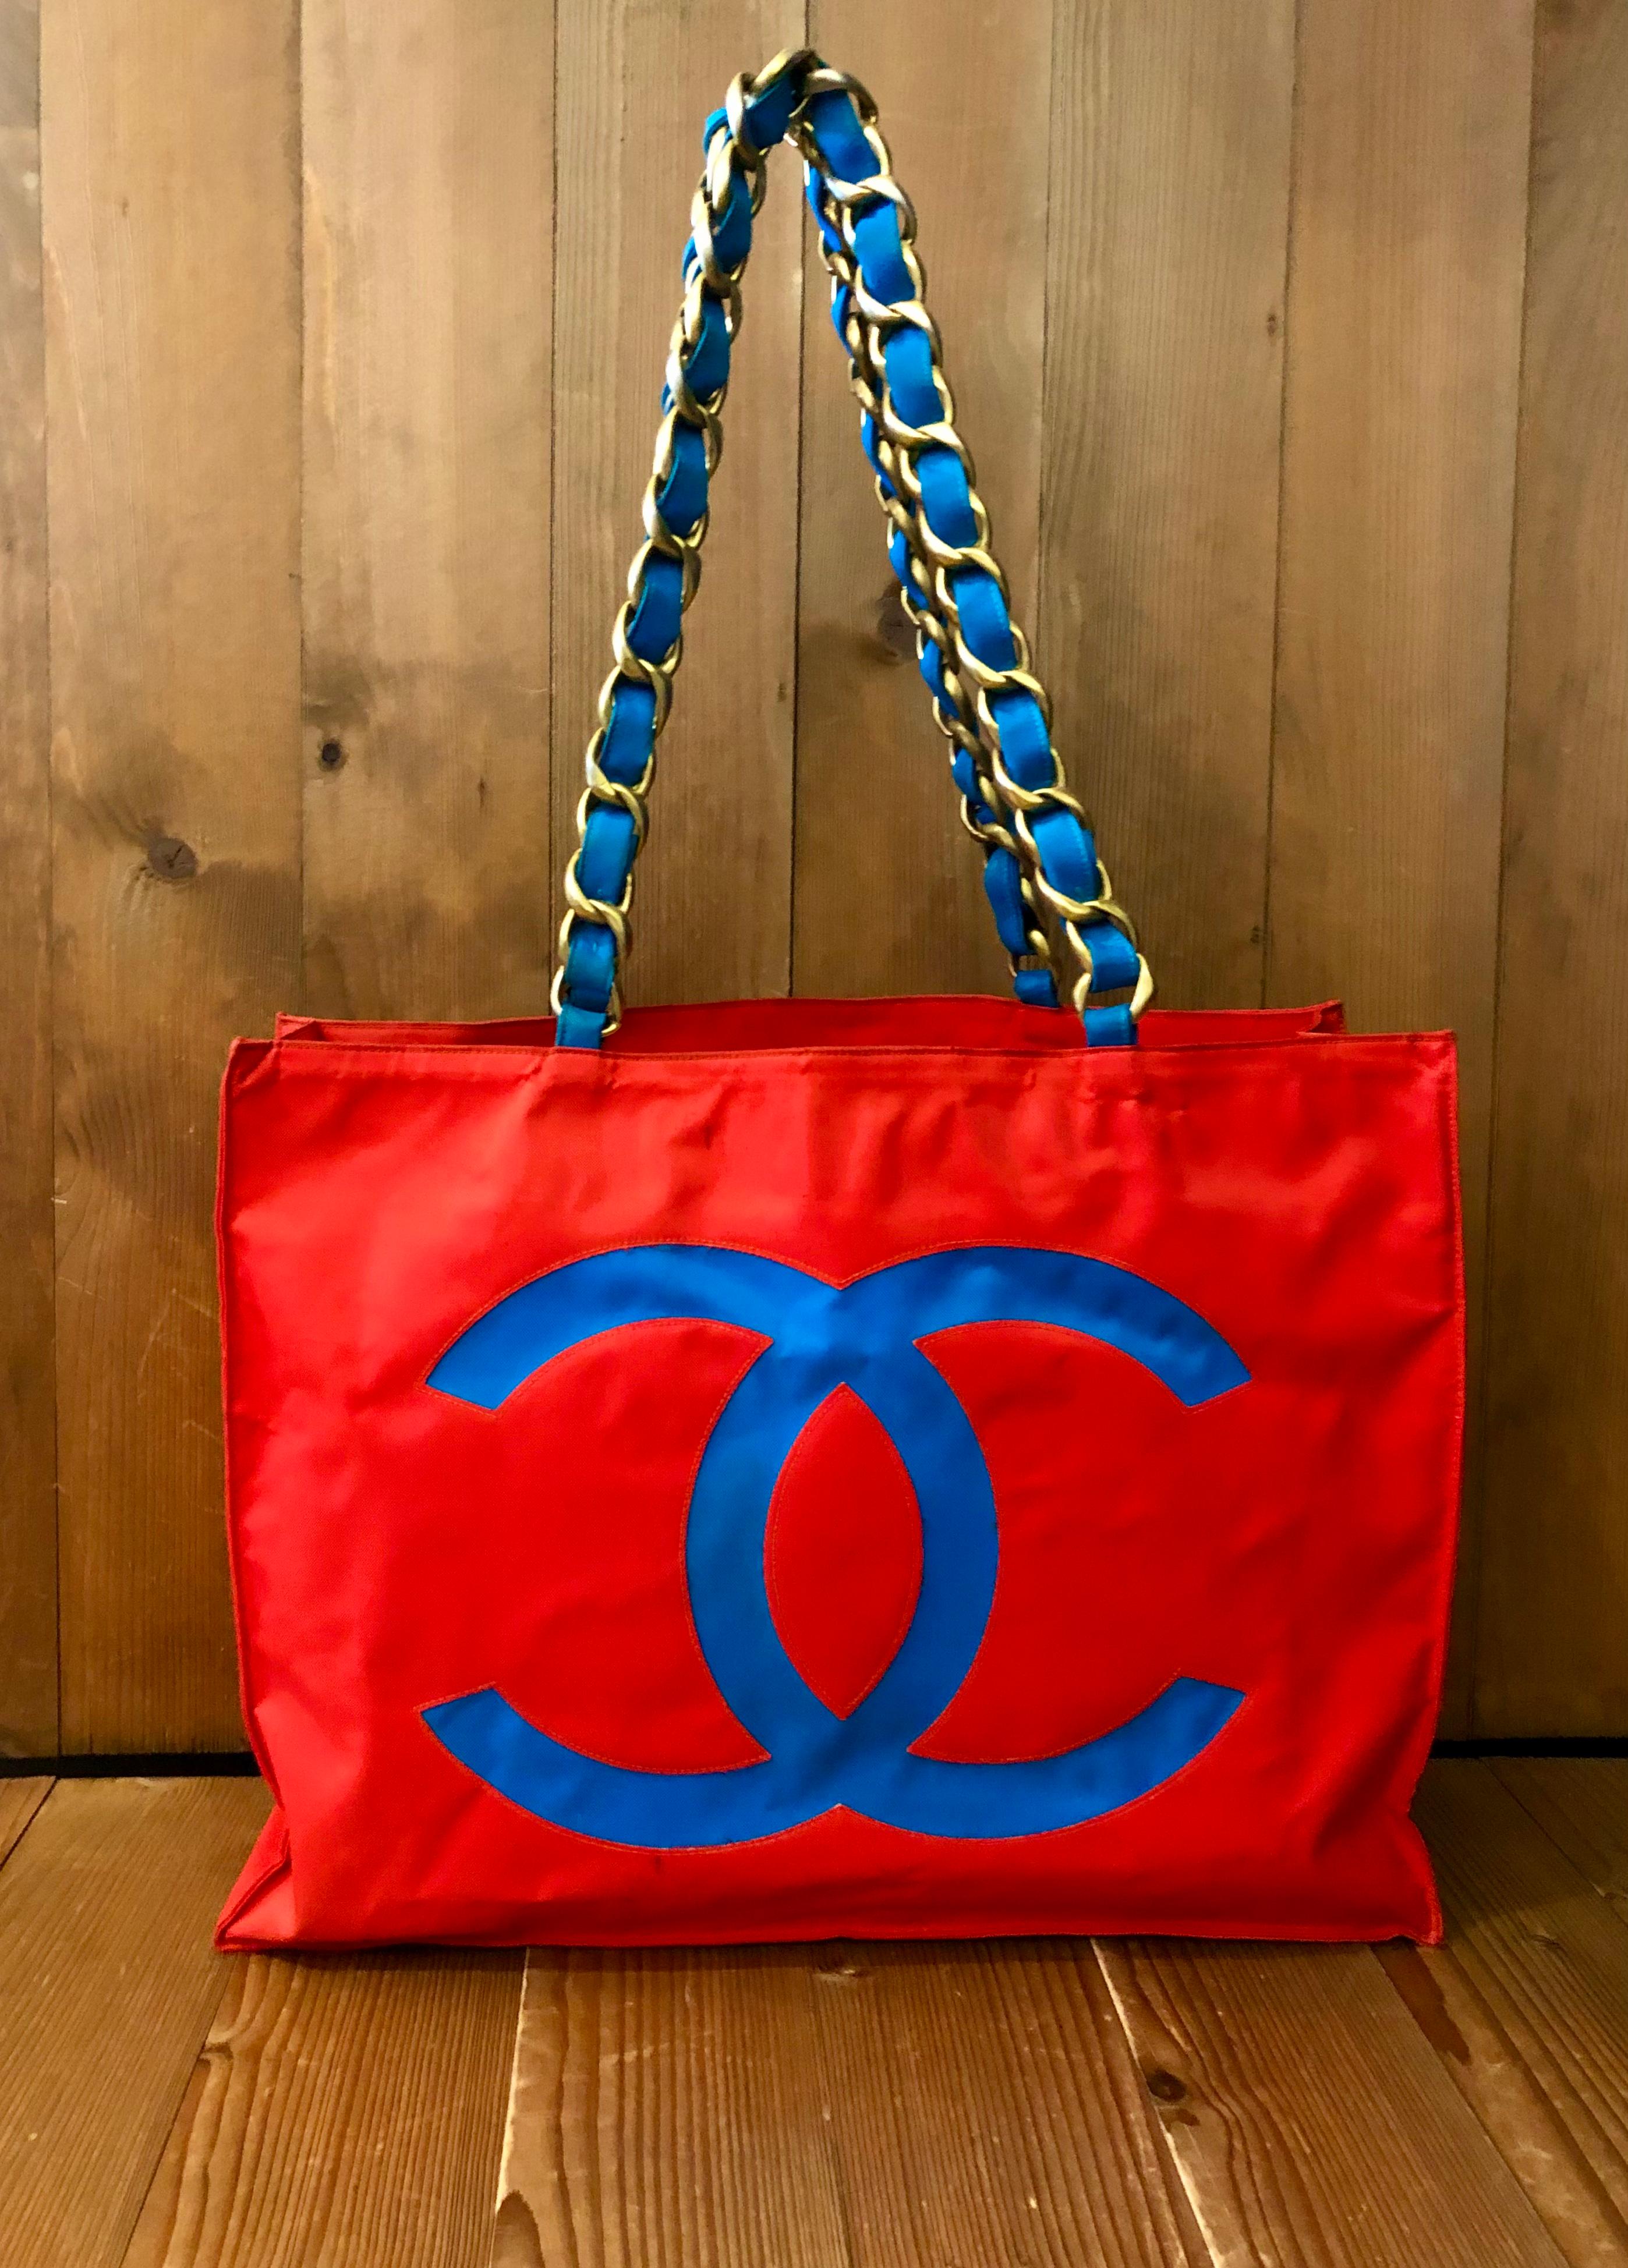 Women's or Men's 1990s Vintage CHANEL Jumbo Nylon Chain Tote Red Turquoise 